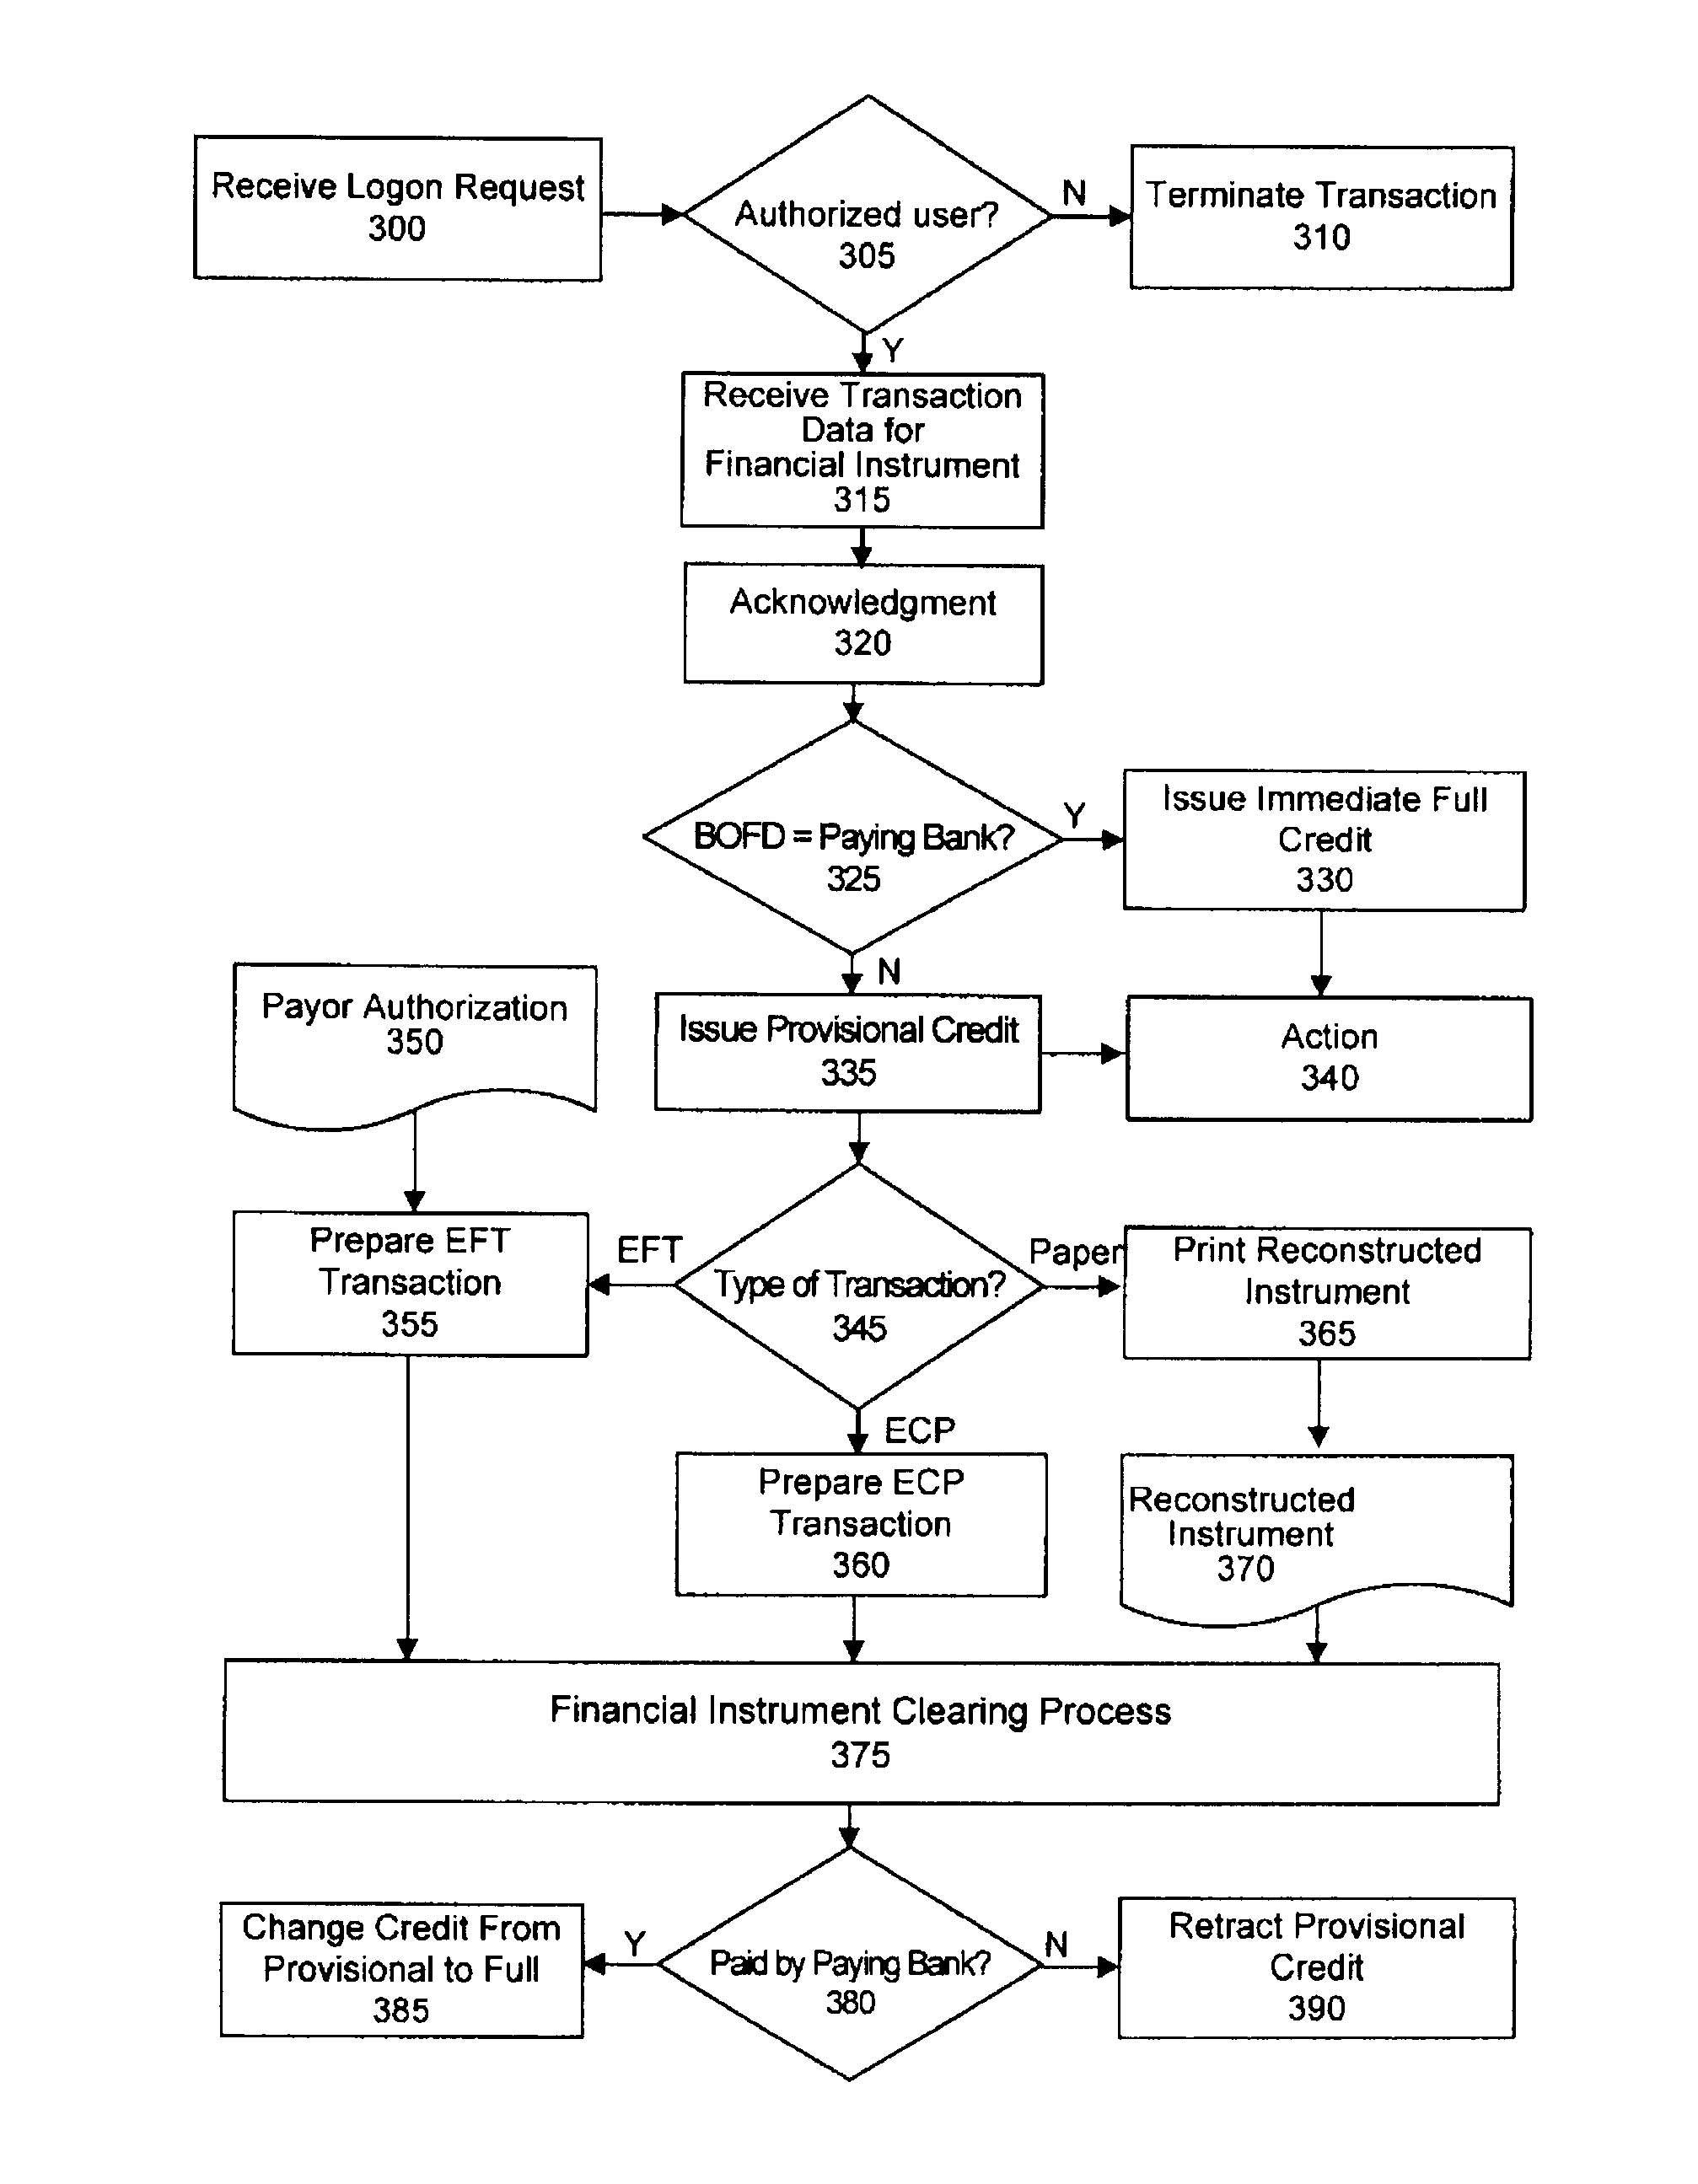 System and method for electronic deposit of a financial instrument by banking customers from remote locations by use of a digital image